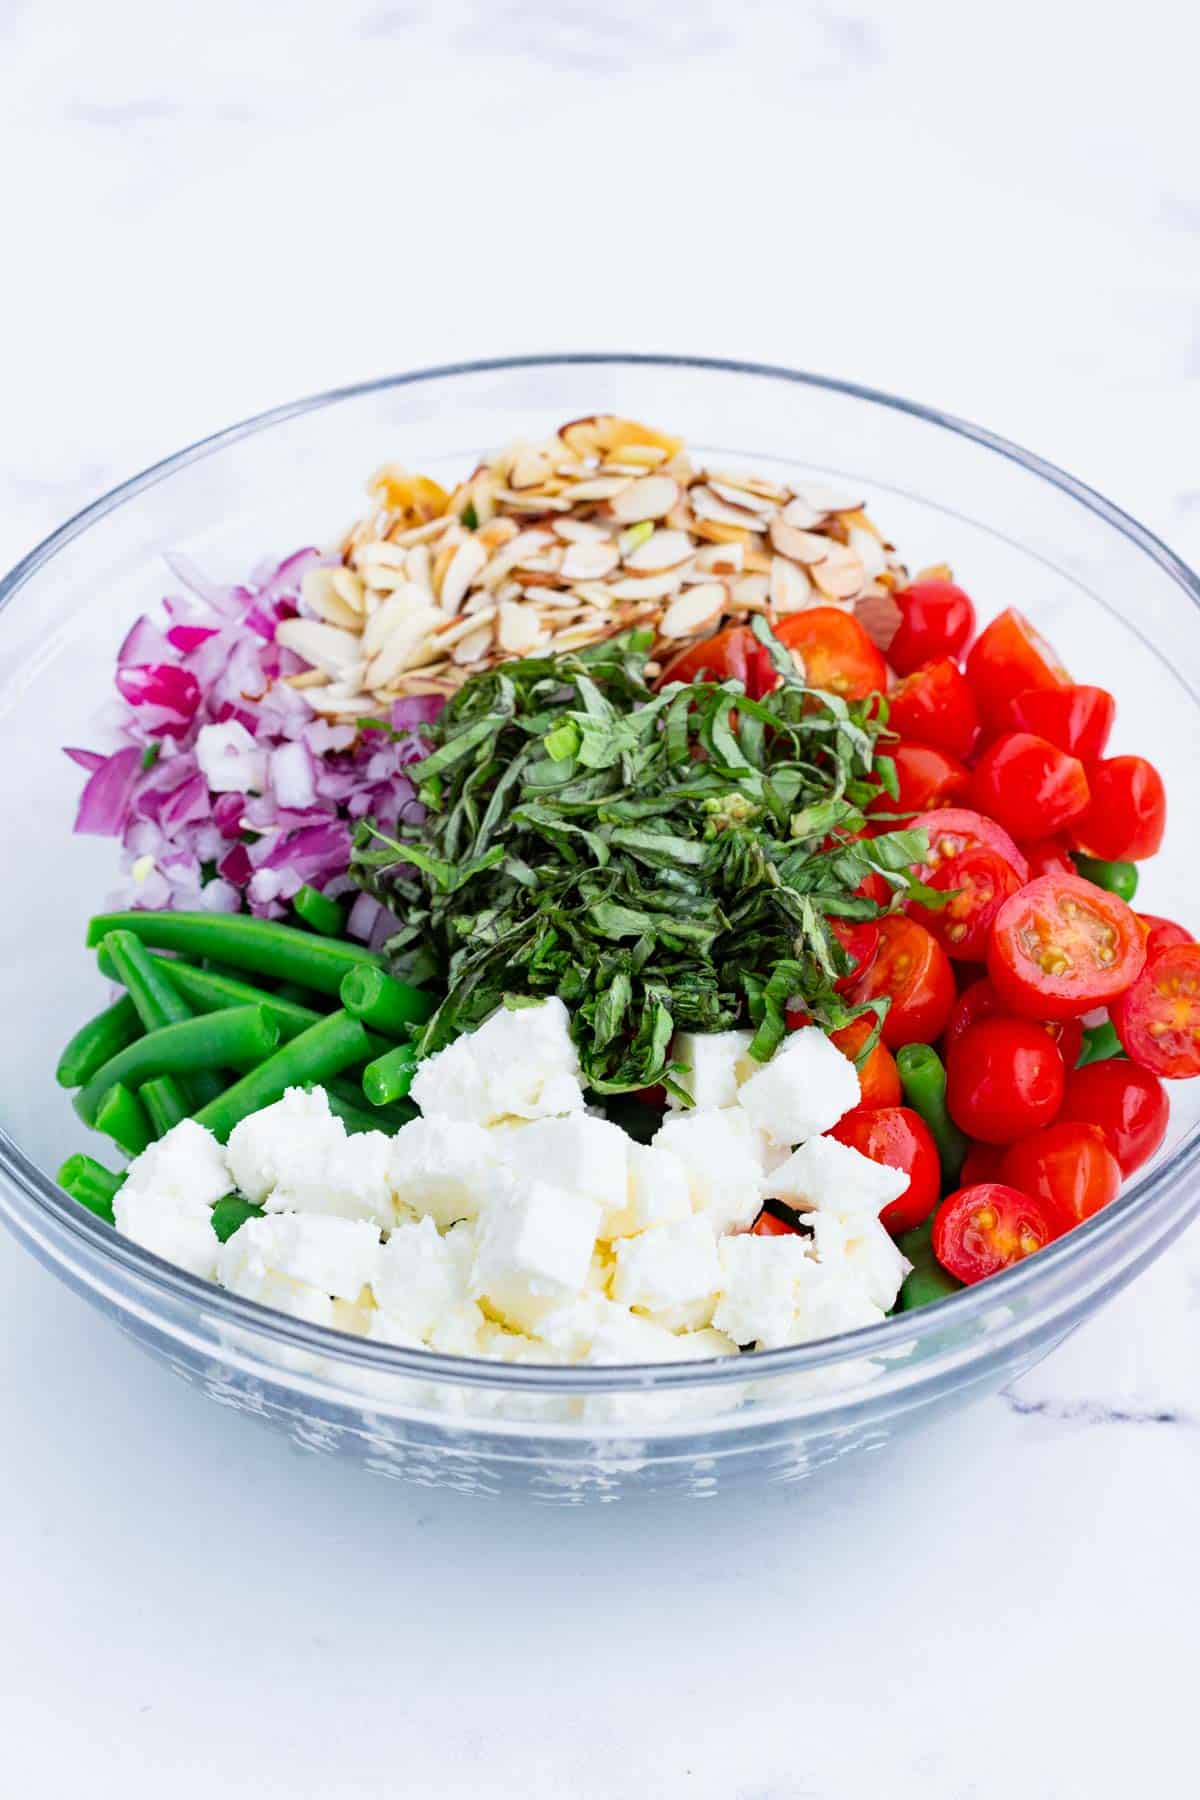 Green bean salad ingredients are combined in a glass bowl.